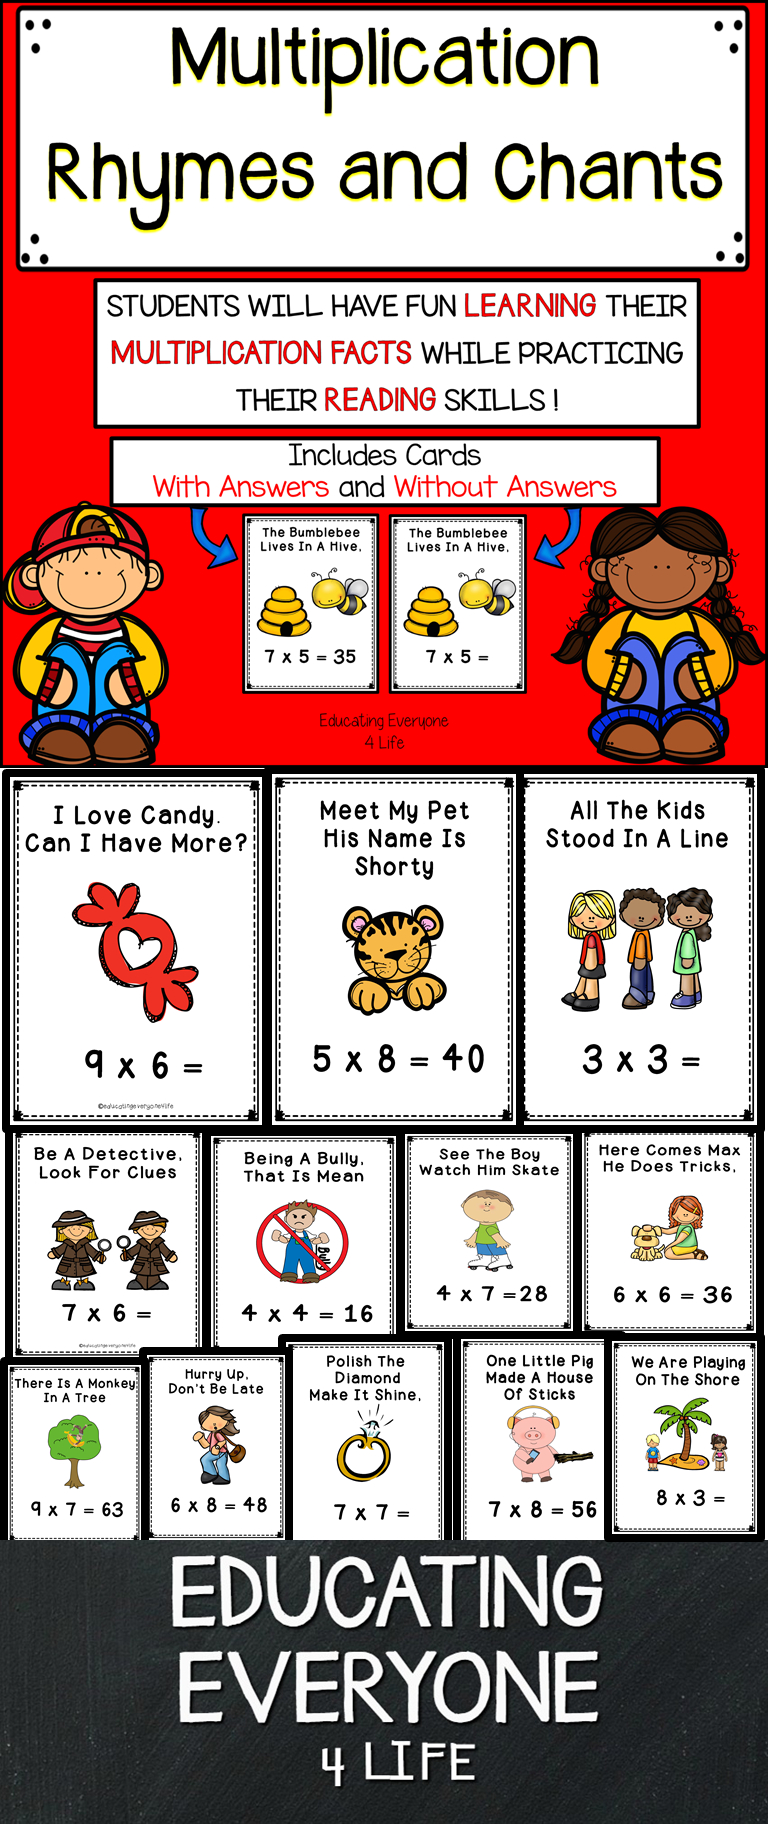 Multiplication Rhymes And Chants | Multiplication Facts with regard to Printable Multiplication Rhymes